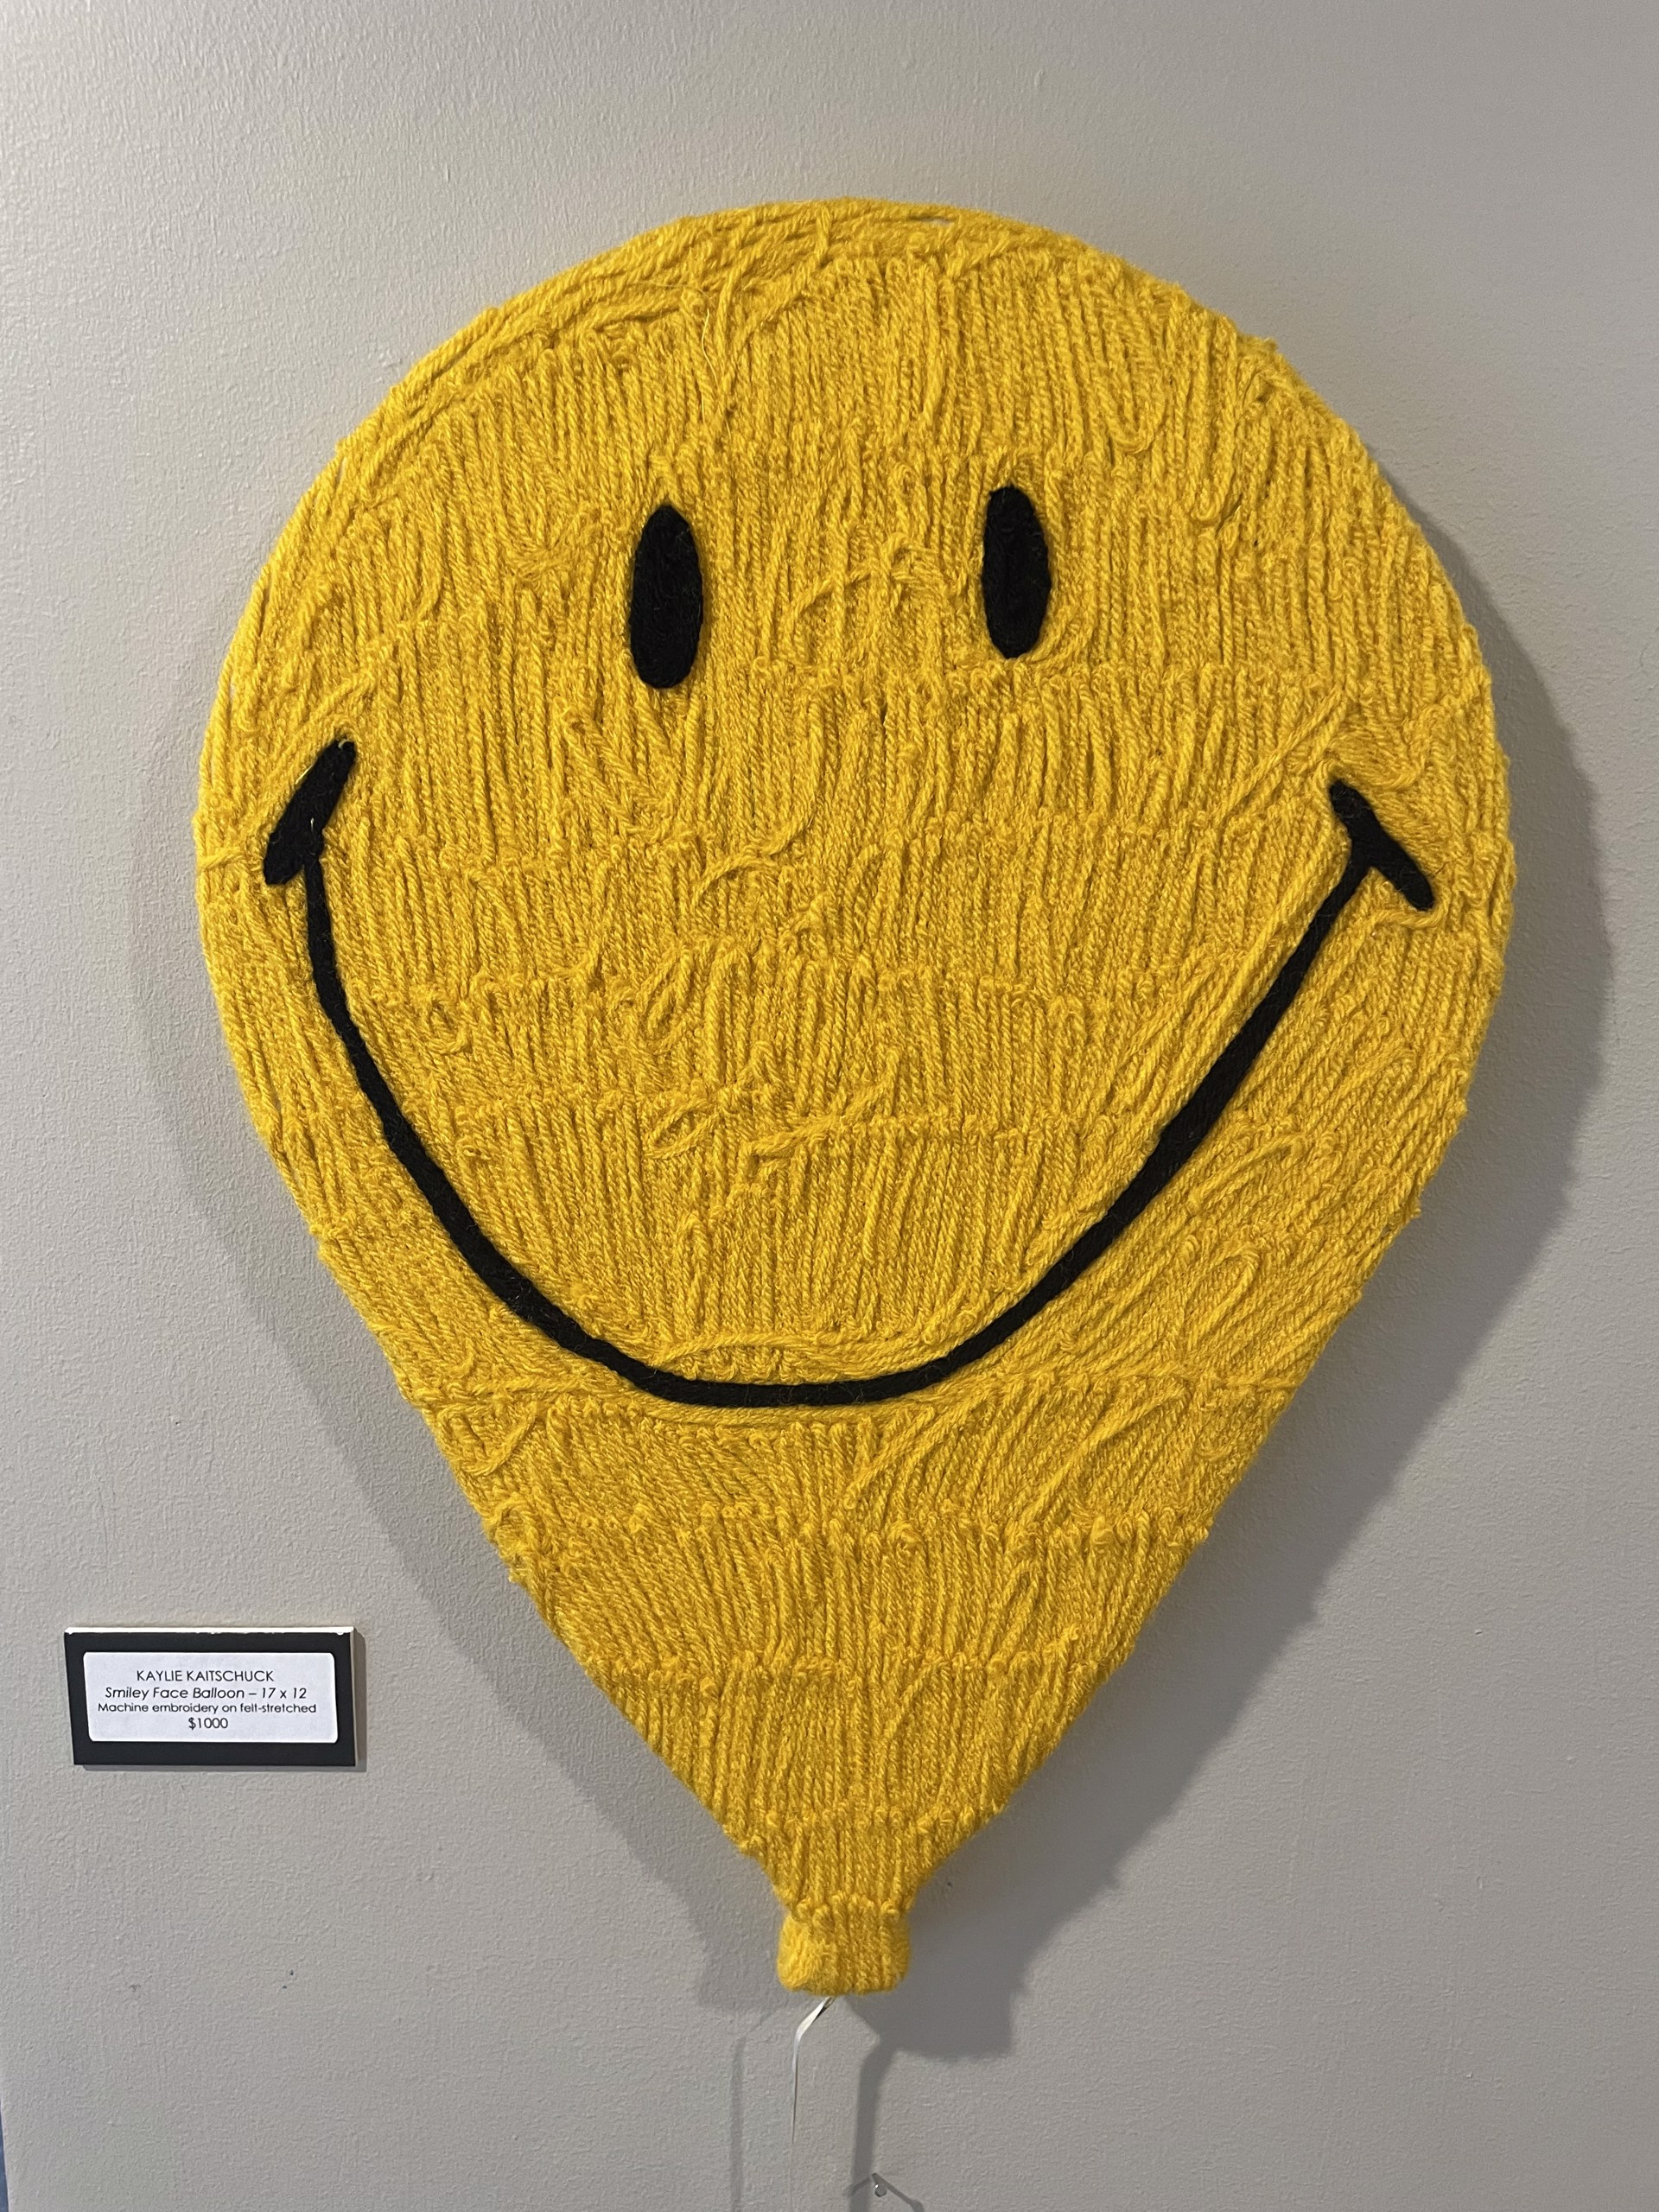 SMILEY FACE BALLOON by KAYLIE KAITSCHUCK